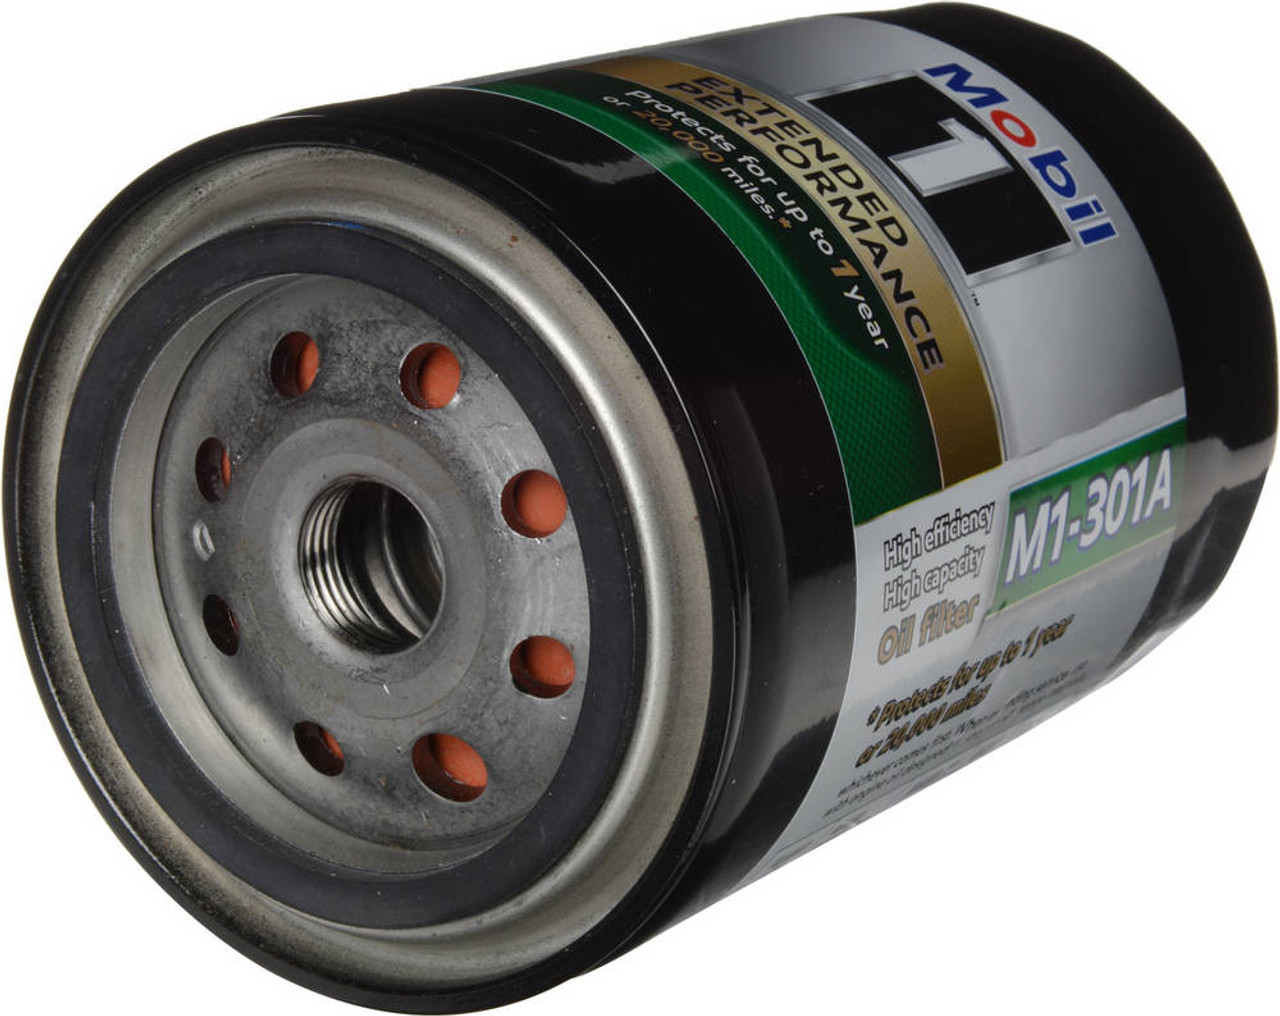 Mobil 1 Mobil 1 Extended Perform ance Oil Filter M1-301A - MOBM1-301A